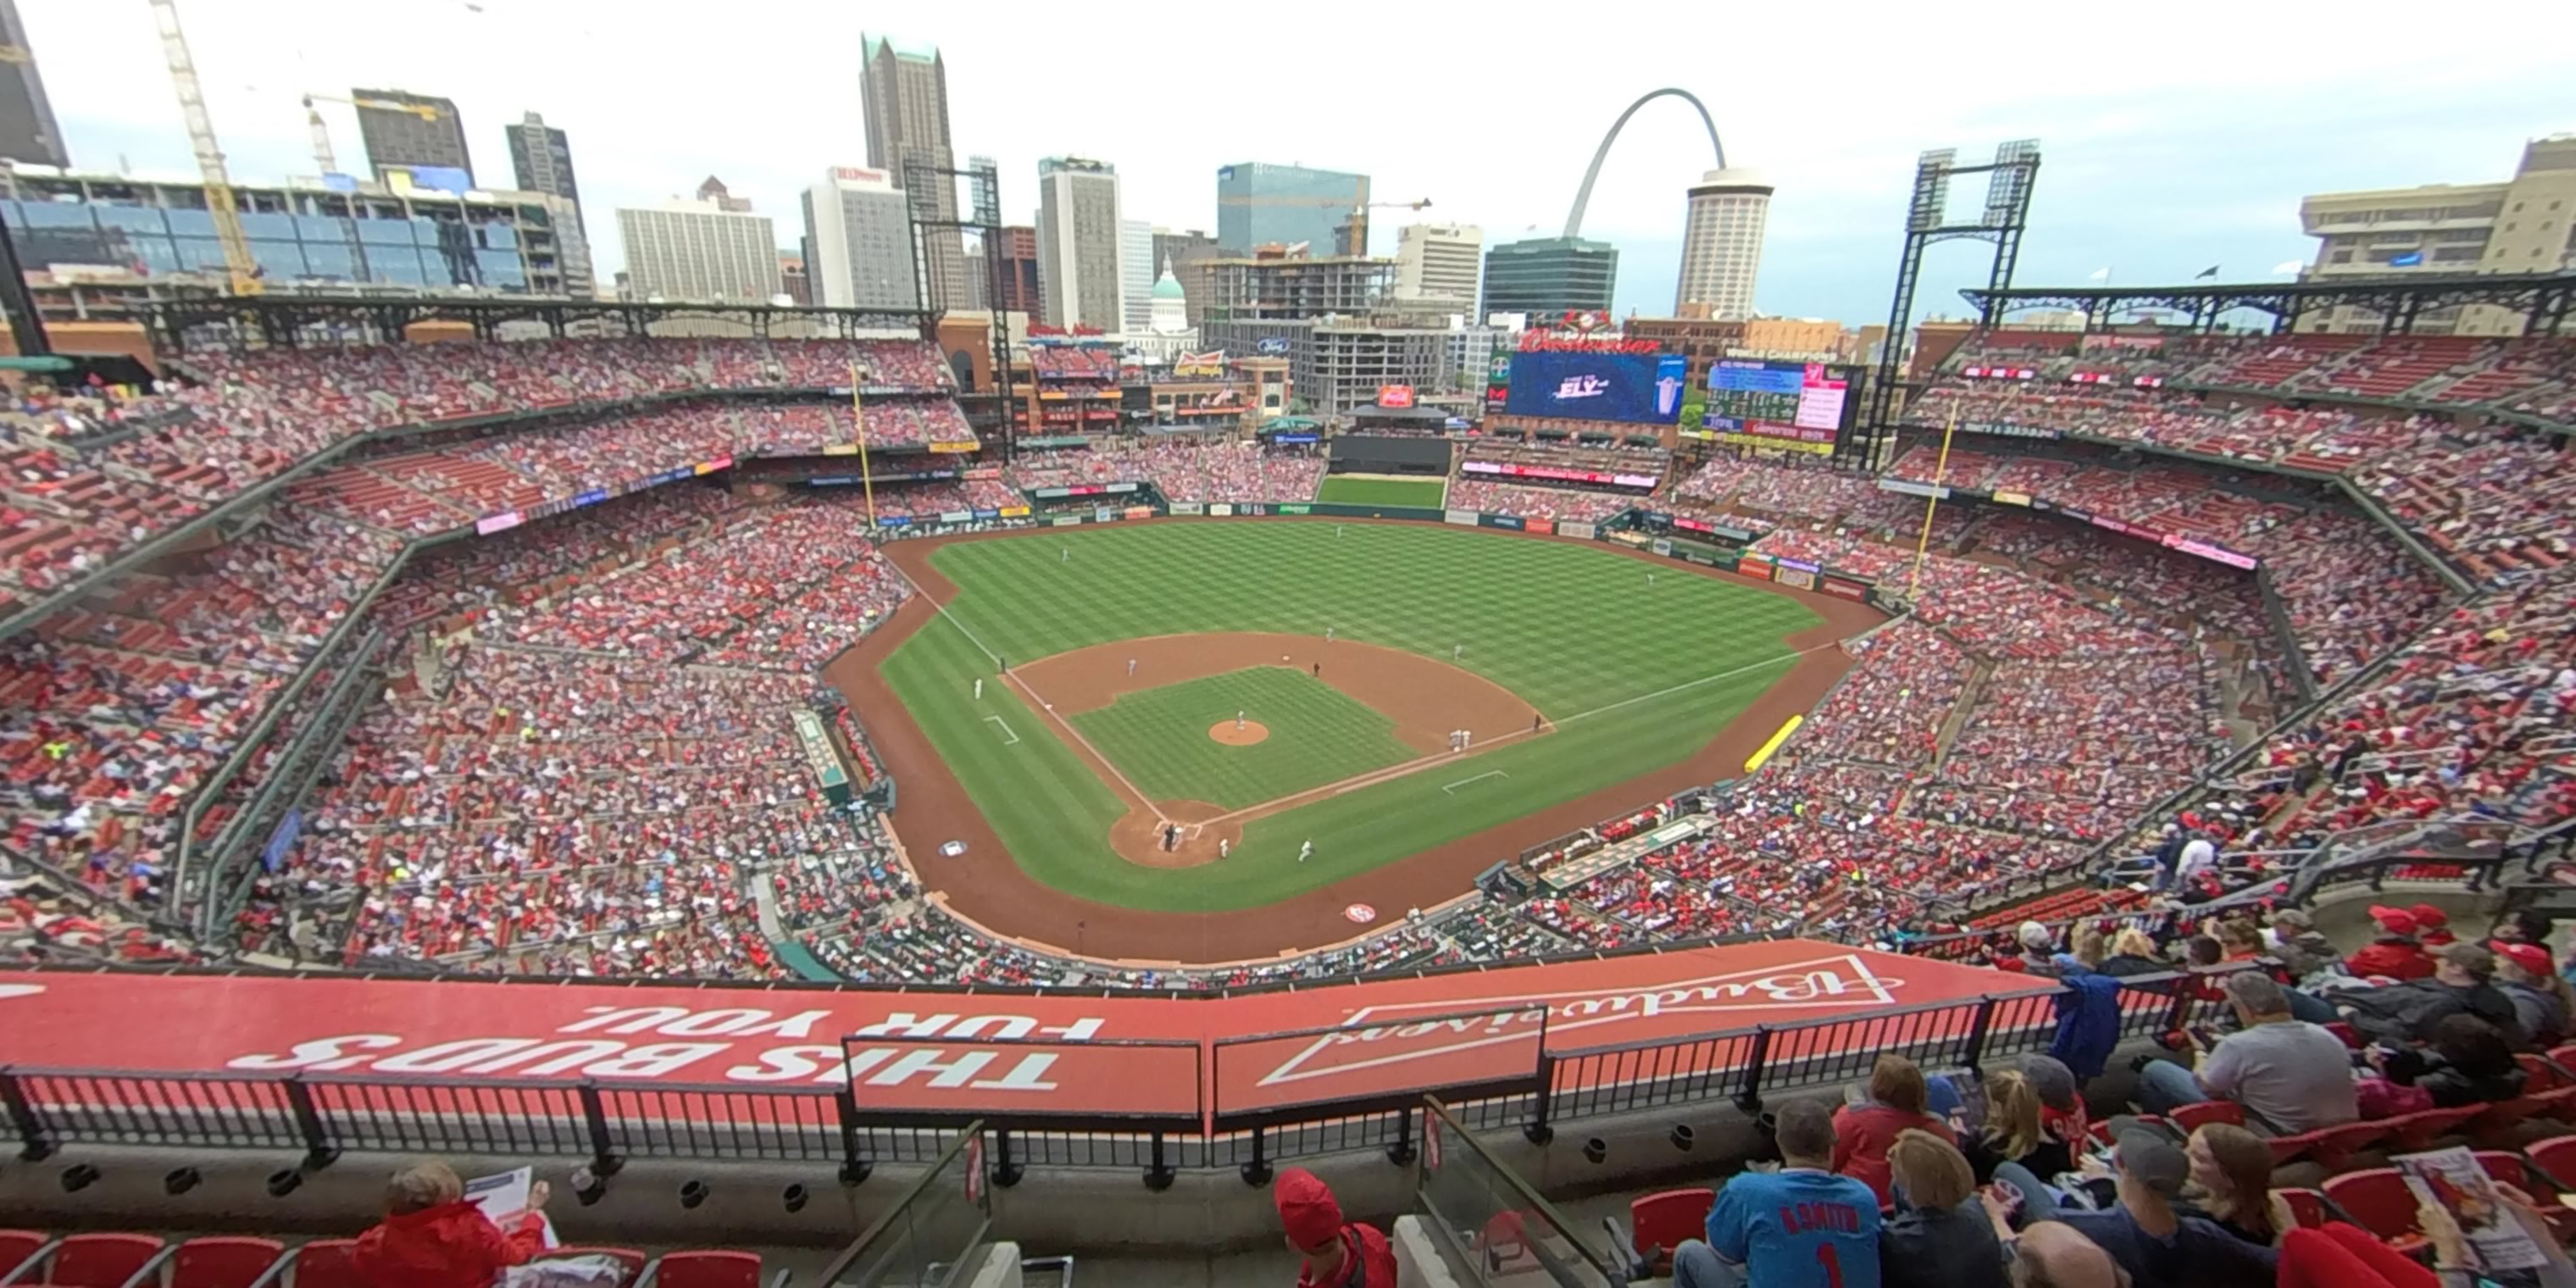 view-of-left-field-from-behind-home-plate-busch-stadium - Baseball